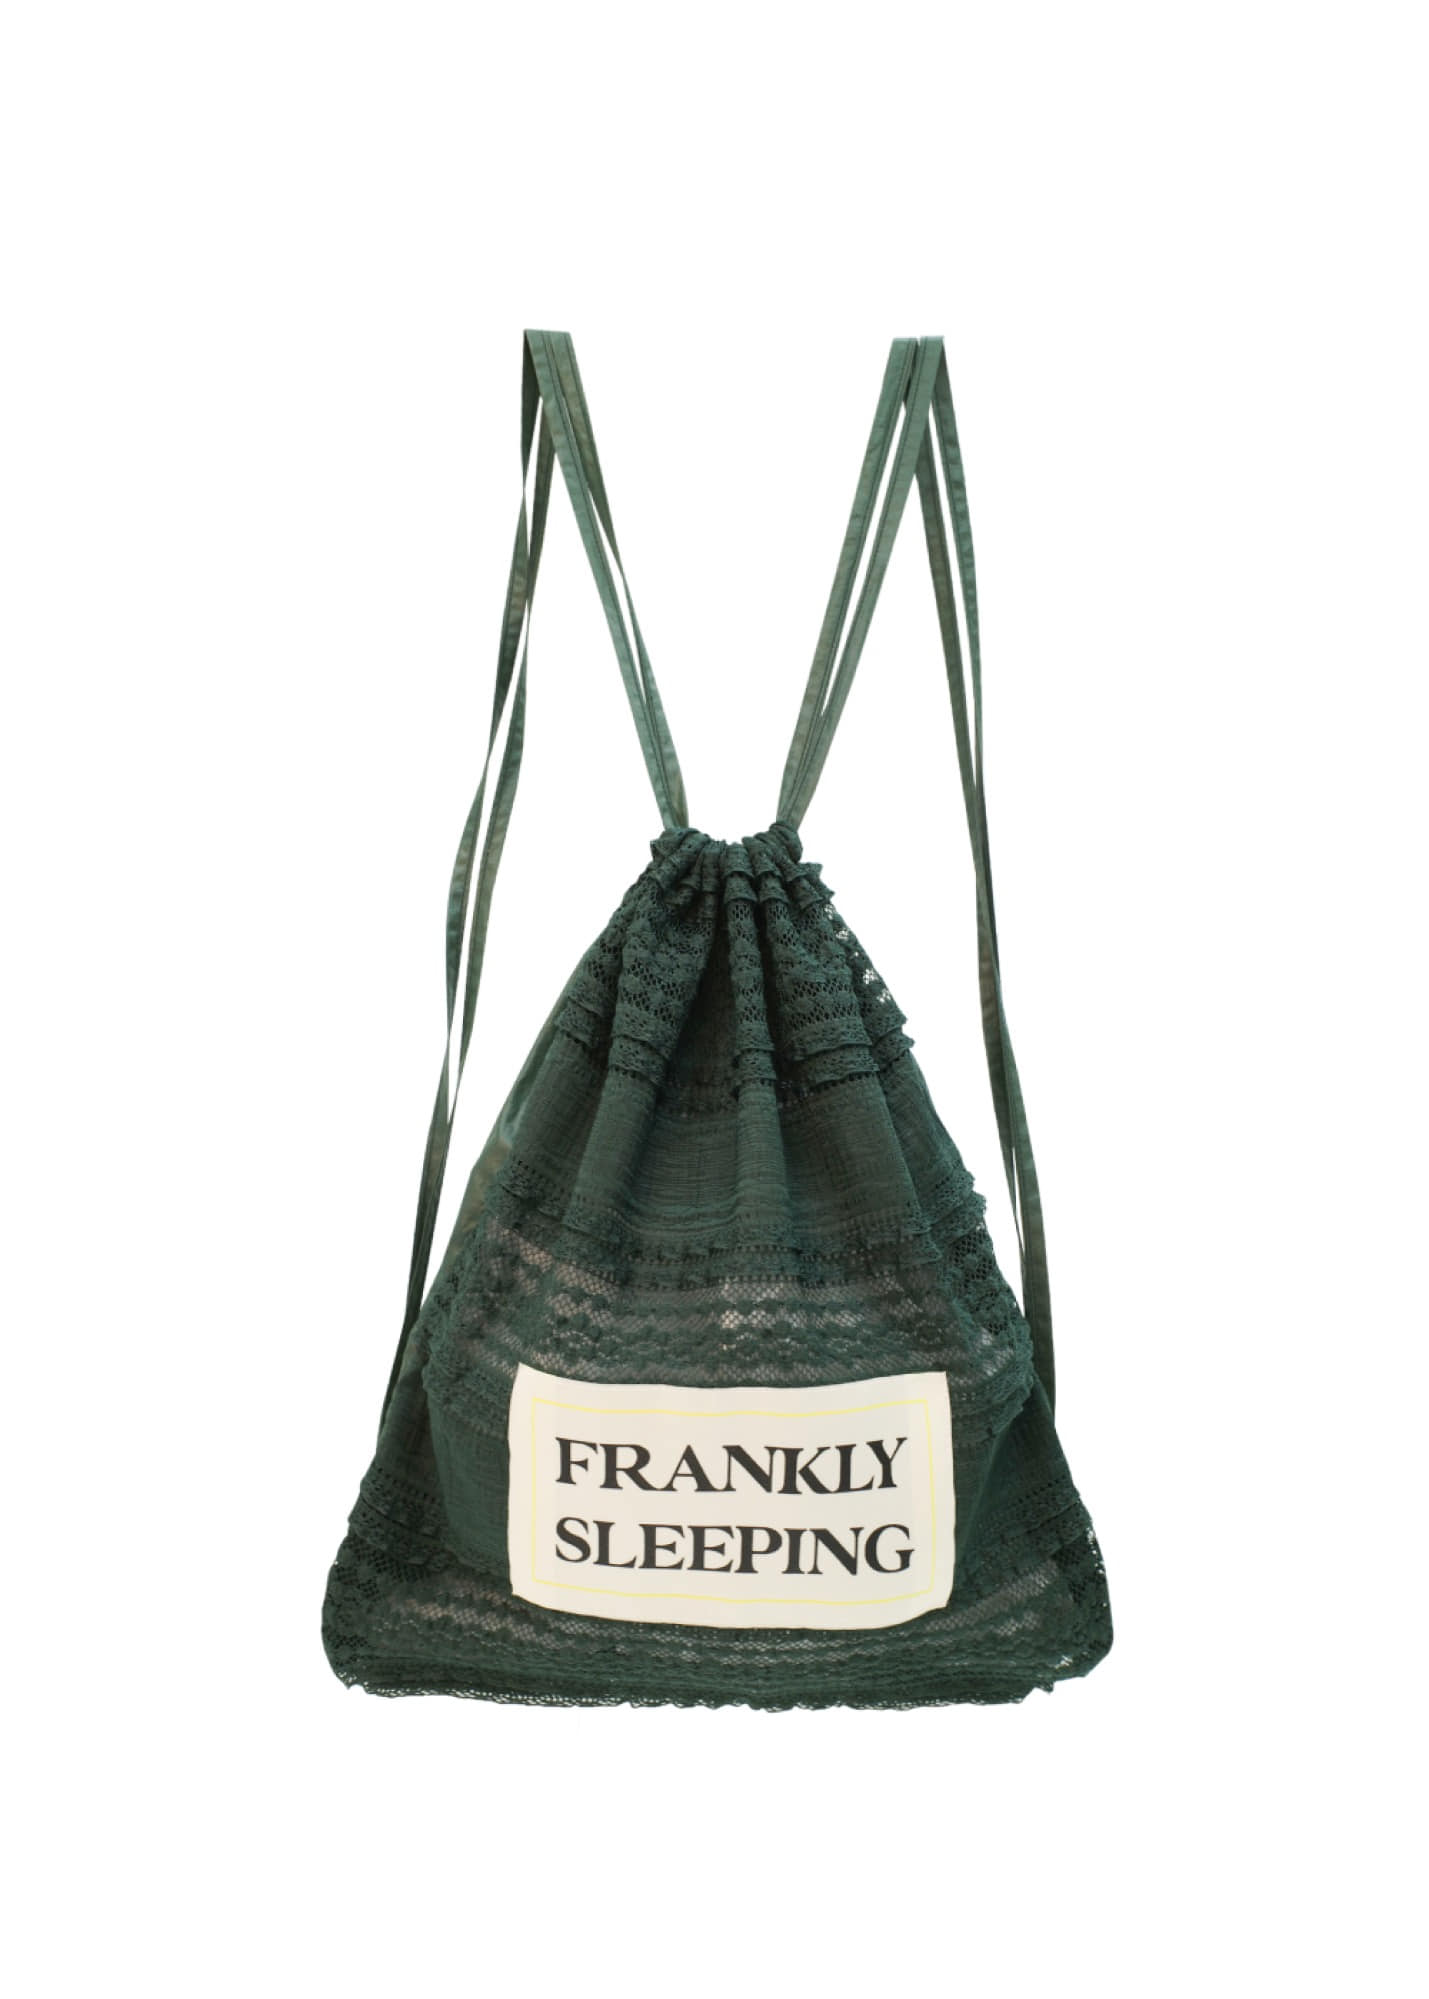 Frankly Sleeping String Bag, Deep Green,FRANKLY